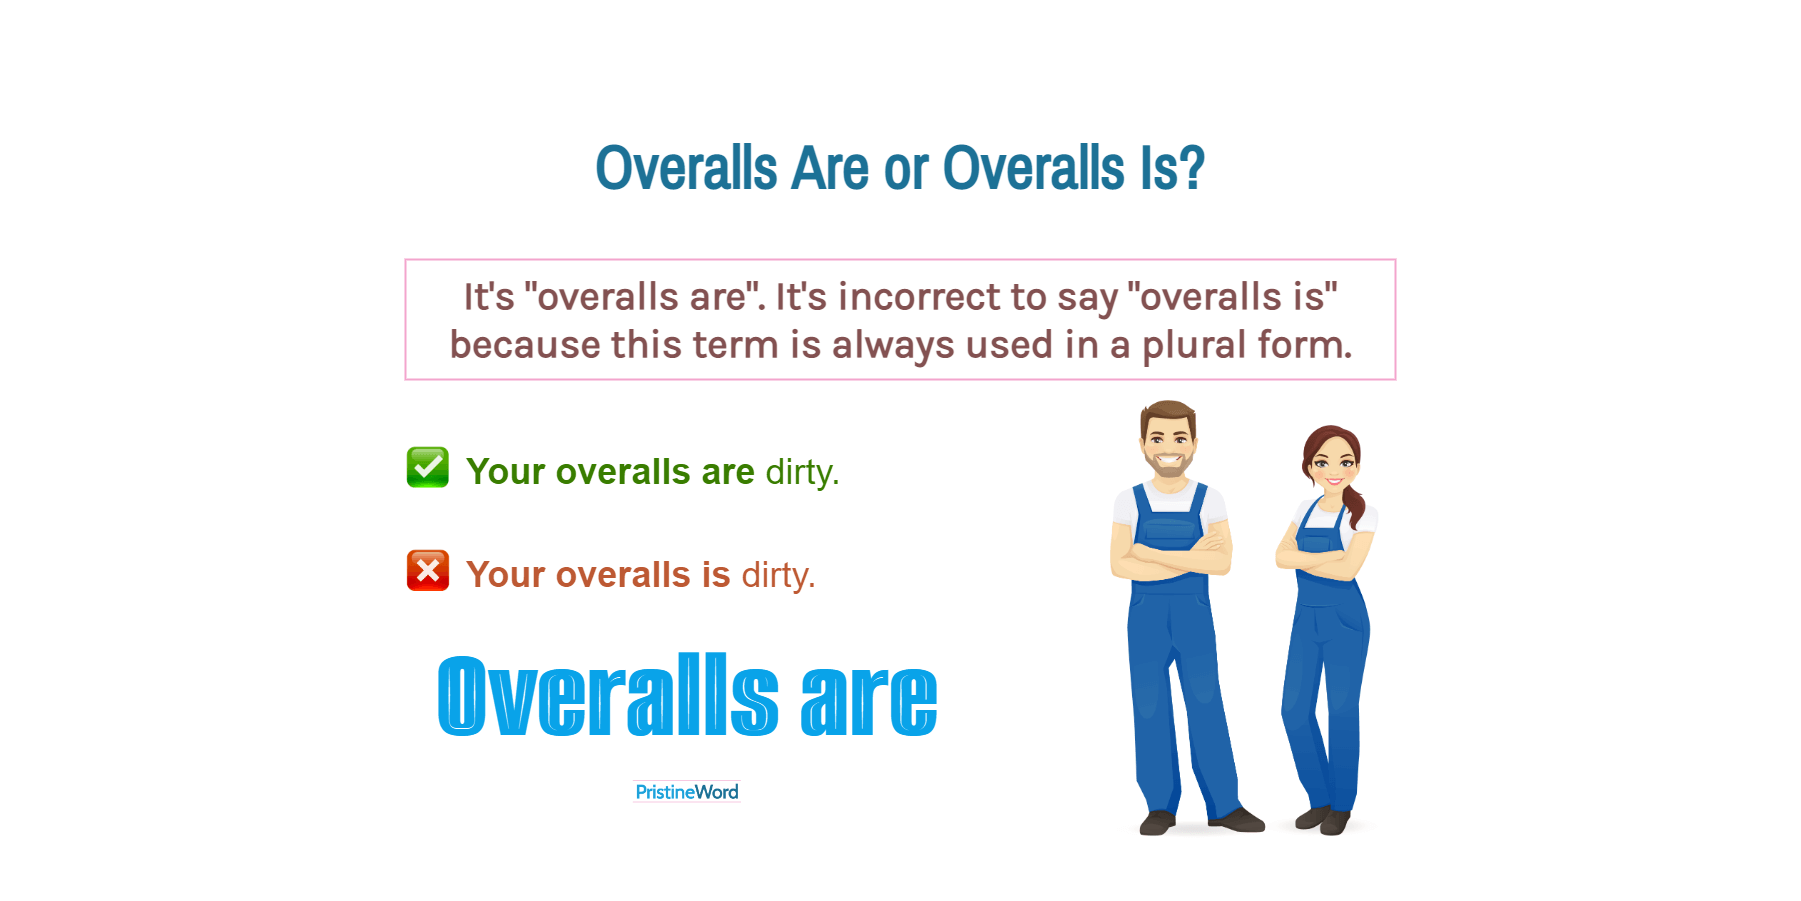 Overalls Are Or Overalls Is. Which Is Correct?